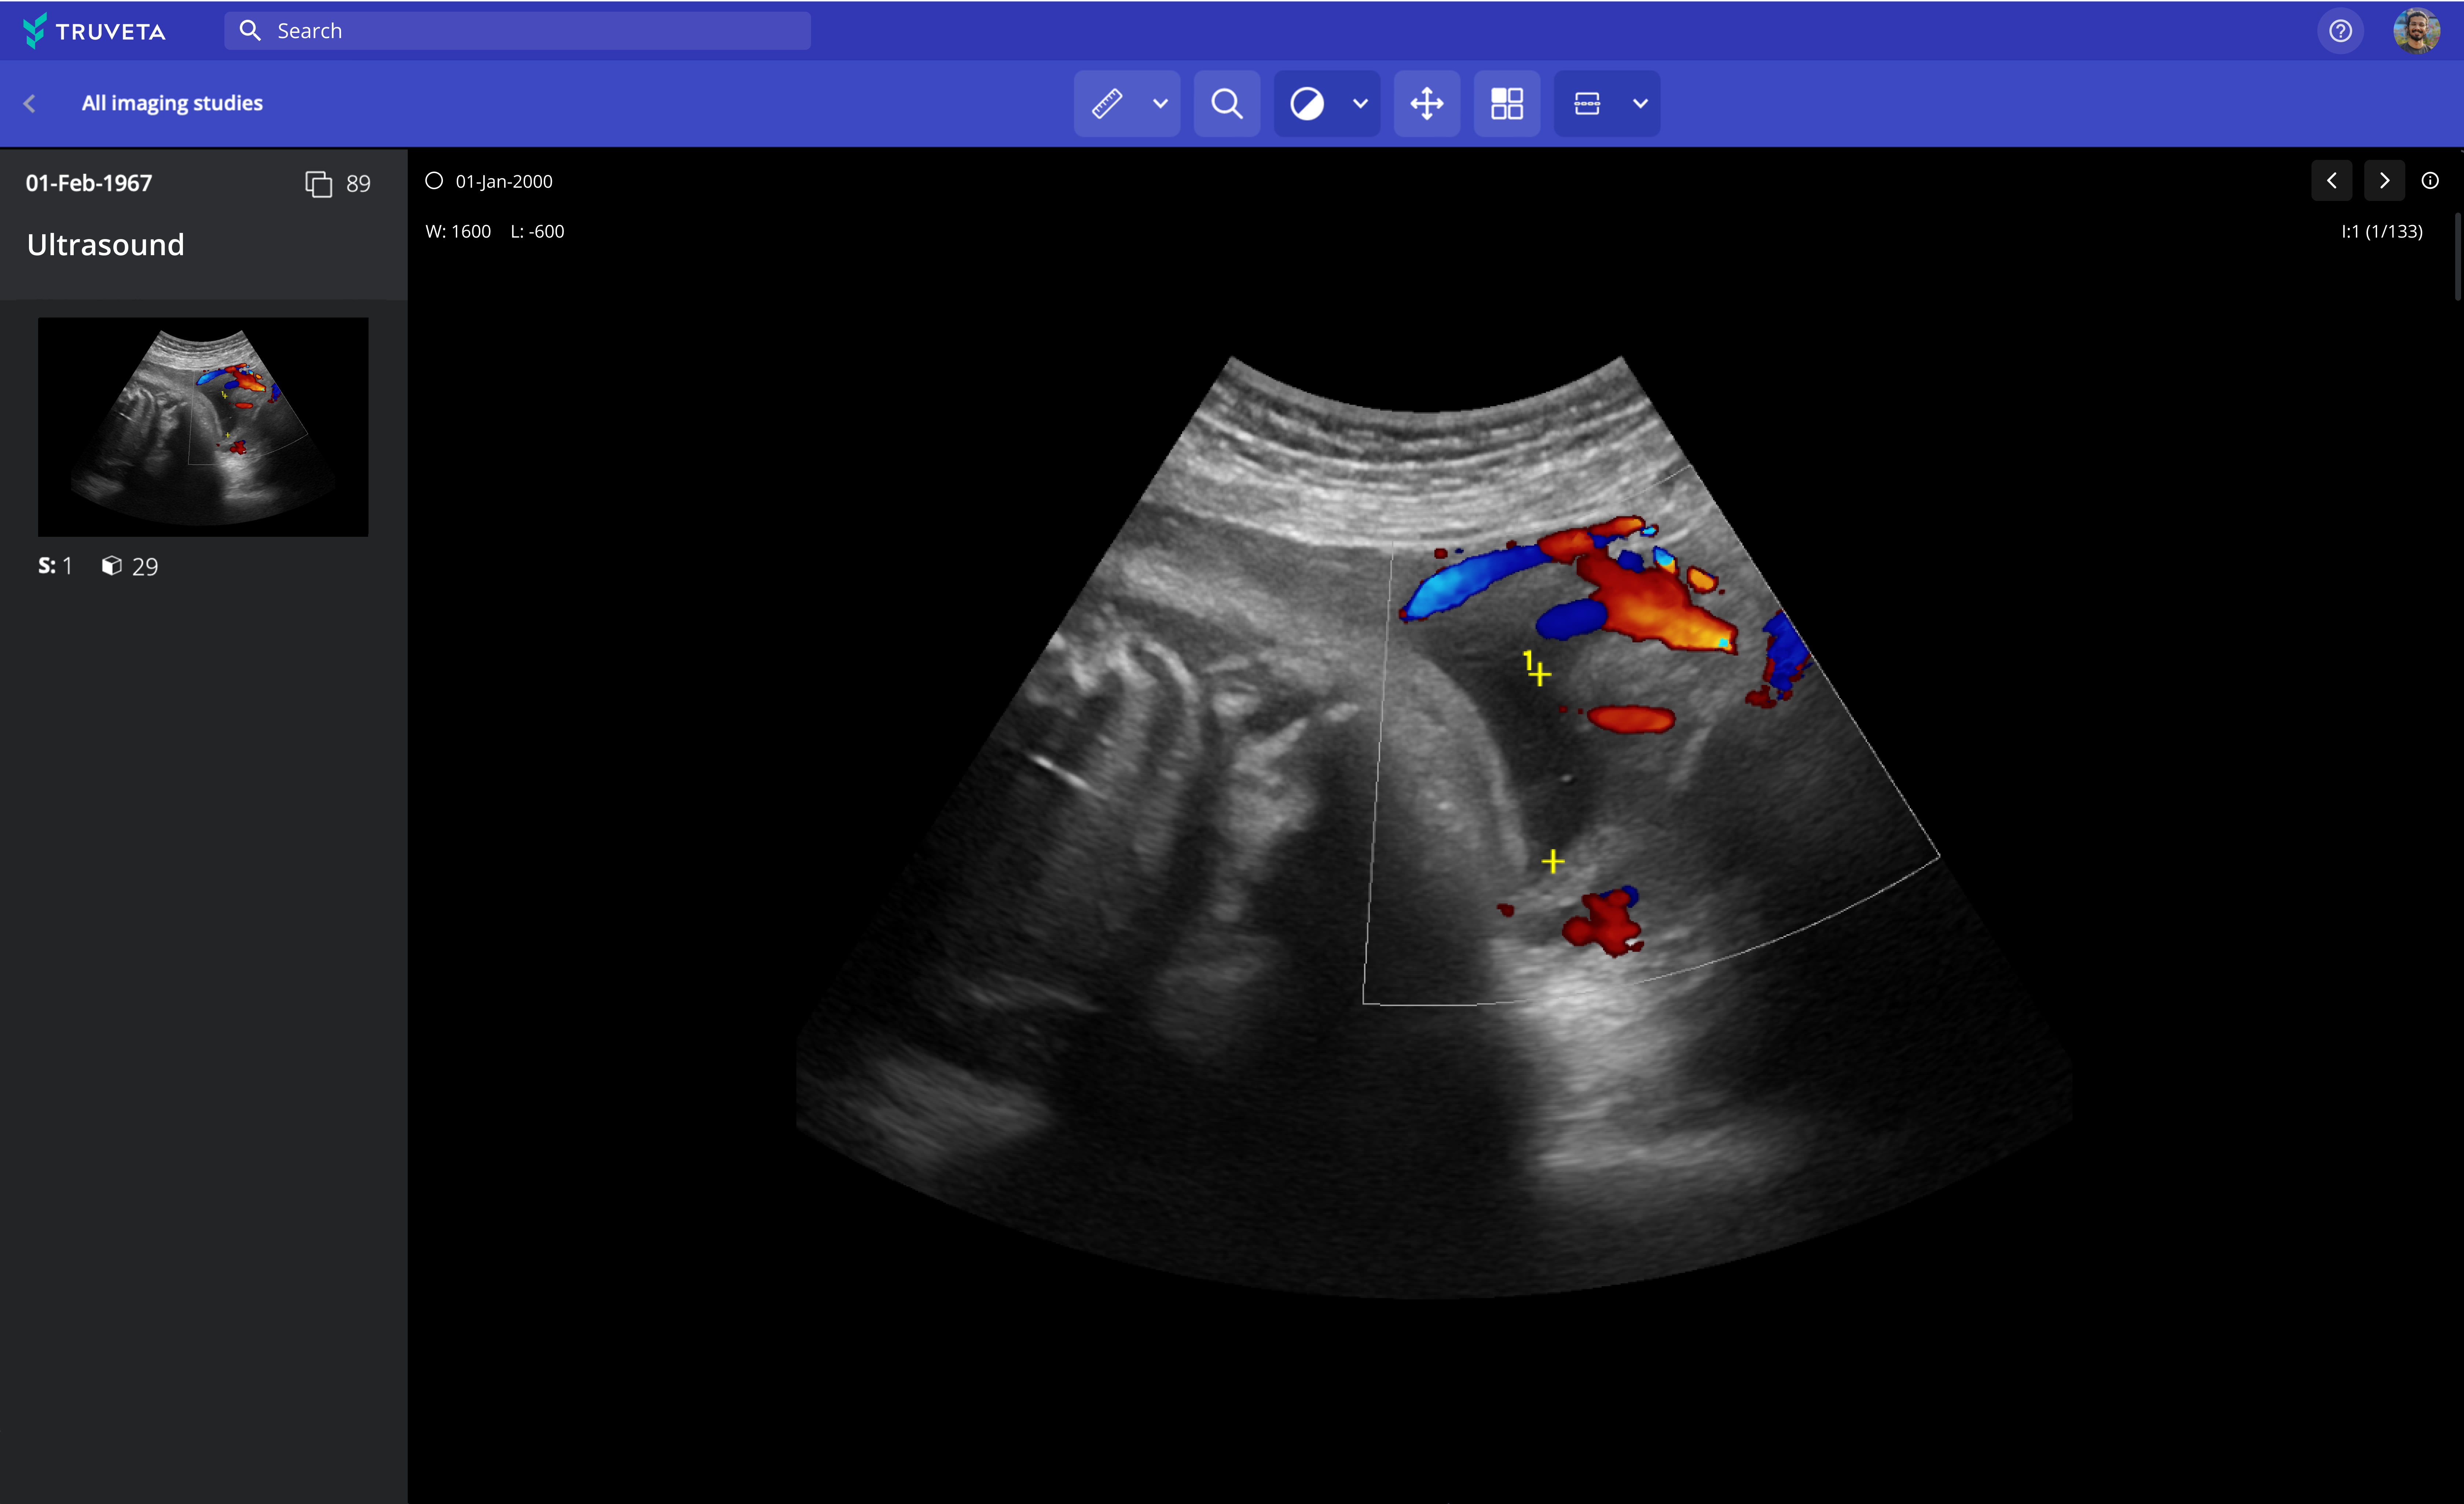 Truveta now empowers researchers to learn from millions of de-identified medical images – across all modalities, including MRI, CT, X-ray, ultrasound, mammogram, and nuclear medicine – integrated with the patient’s EHR data.